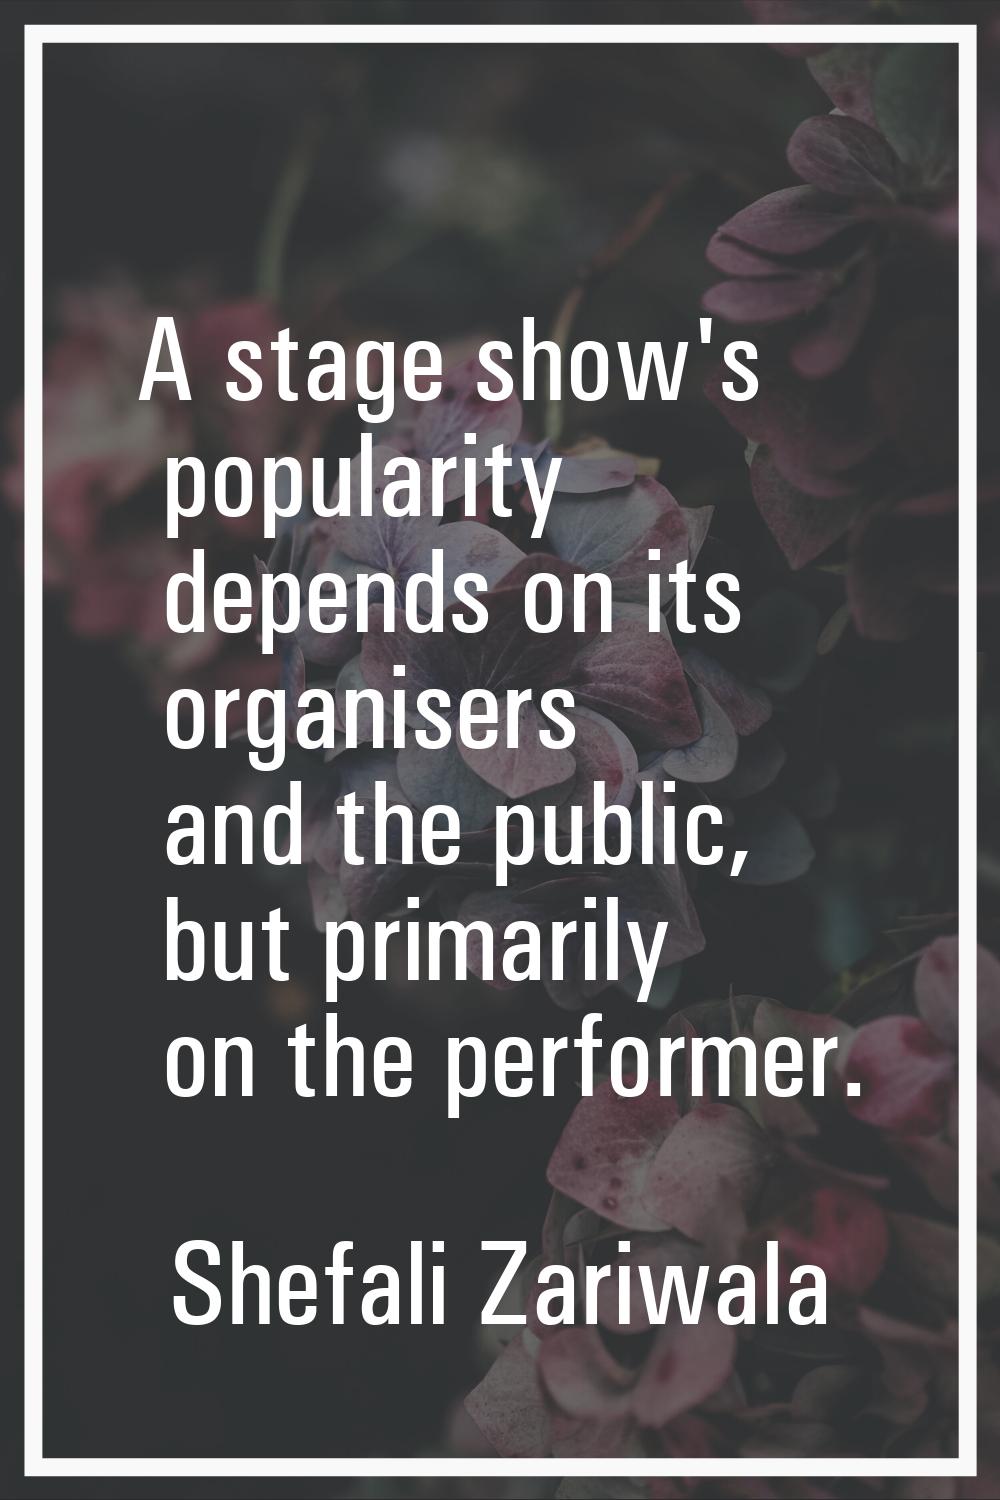 A stage show's popularity depends on its organisers and the public, but primarily on the performer.